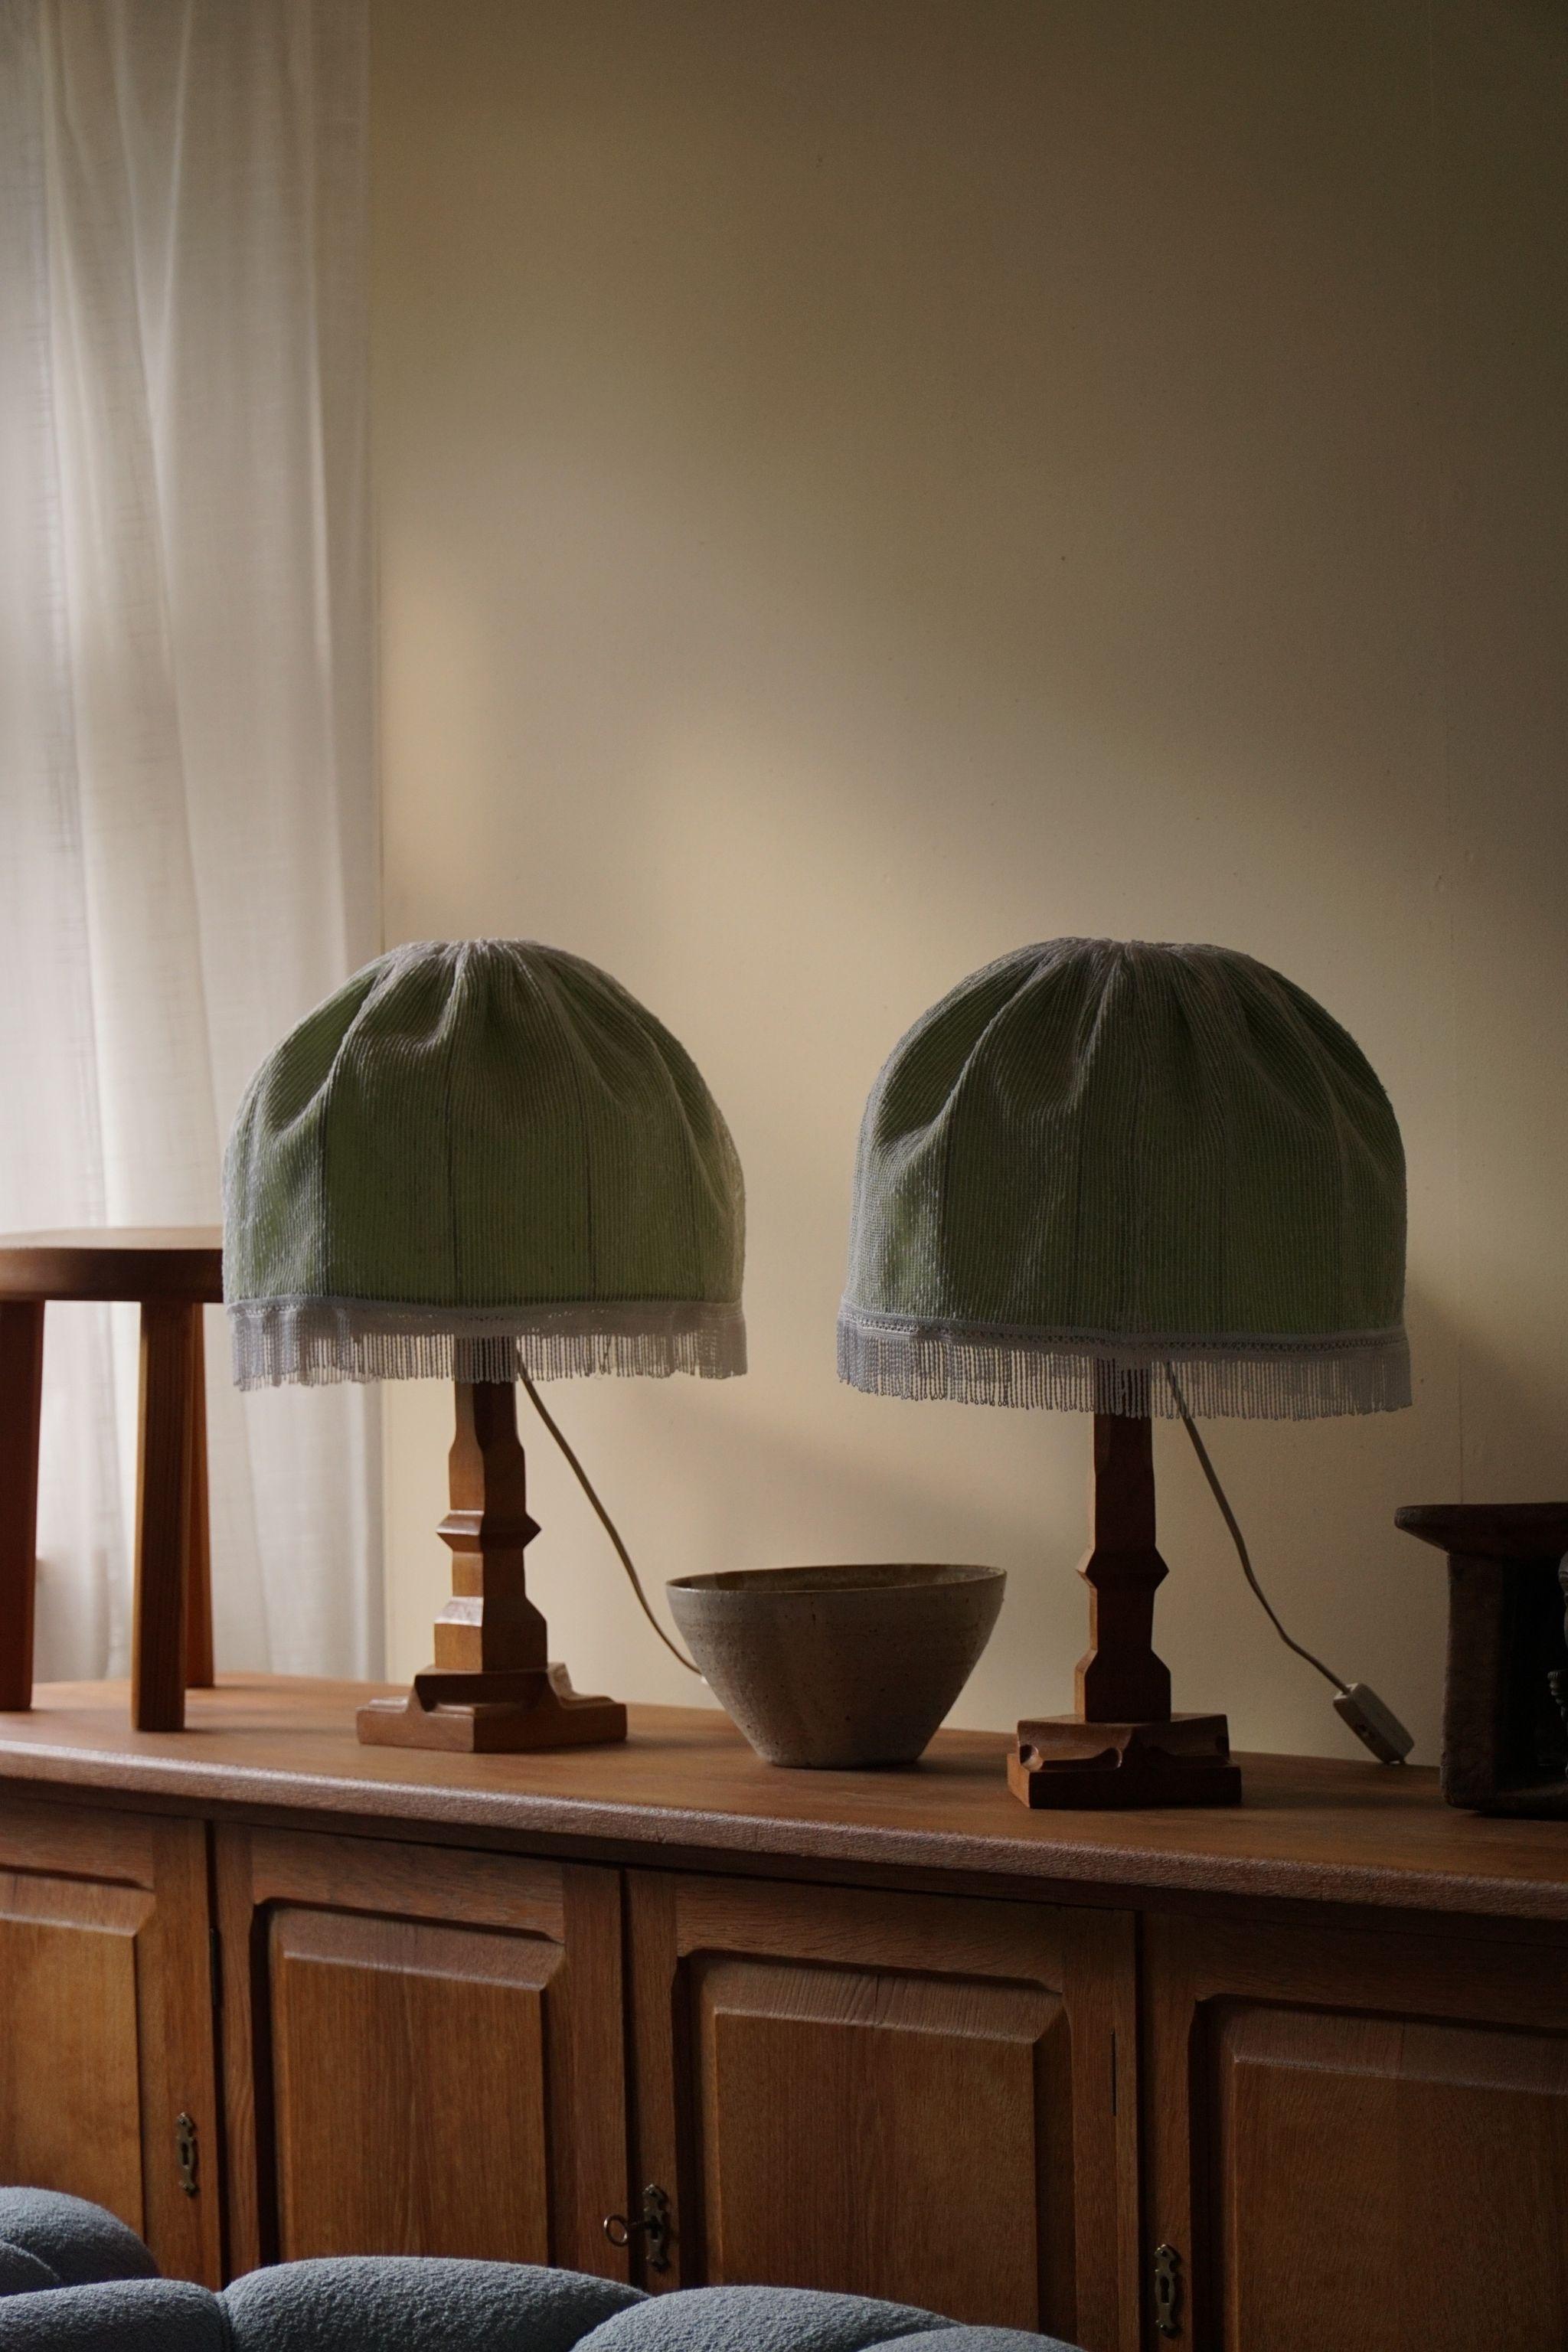 A Pair of Scandinavian Modern Table Lamps in Teak, 1970s For Sale 4